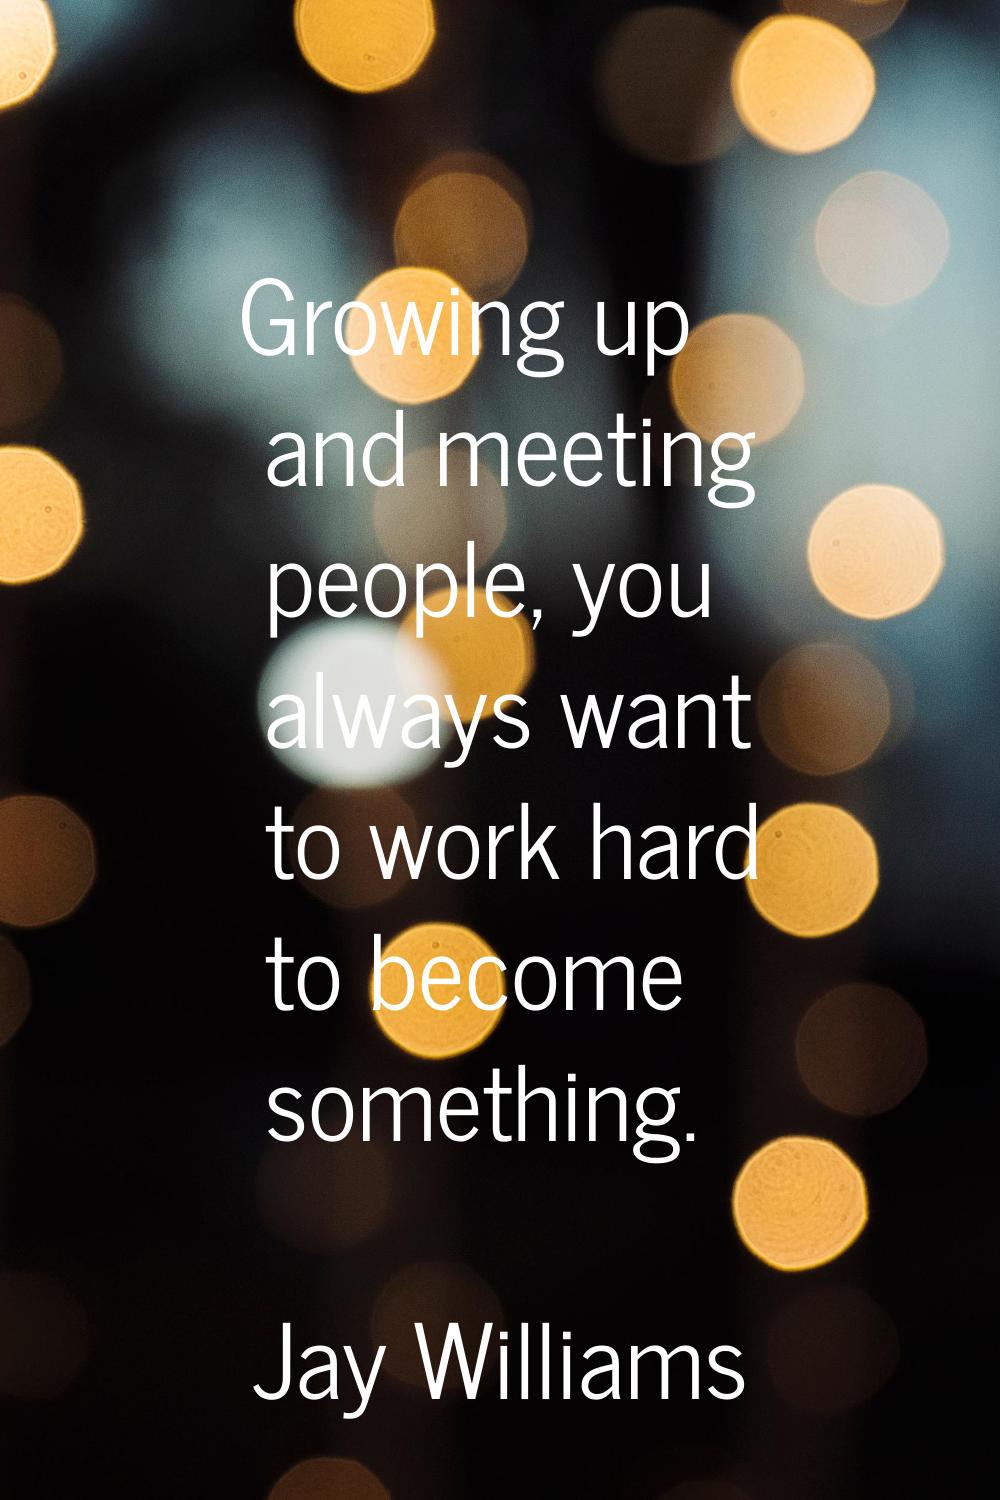 Growing up and meeting people, you always want to work hard to become something.